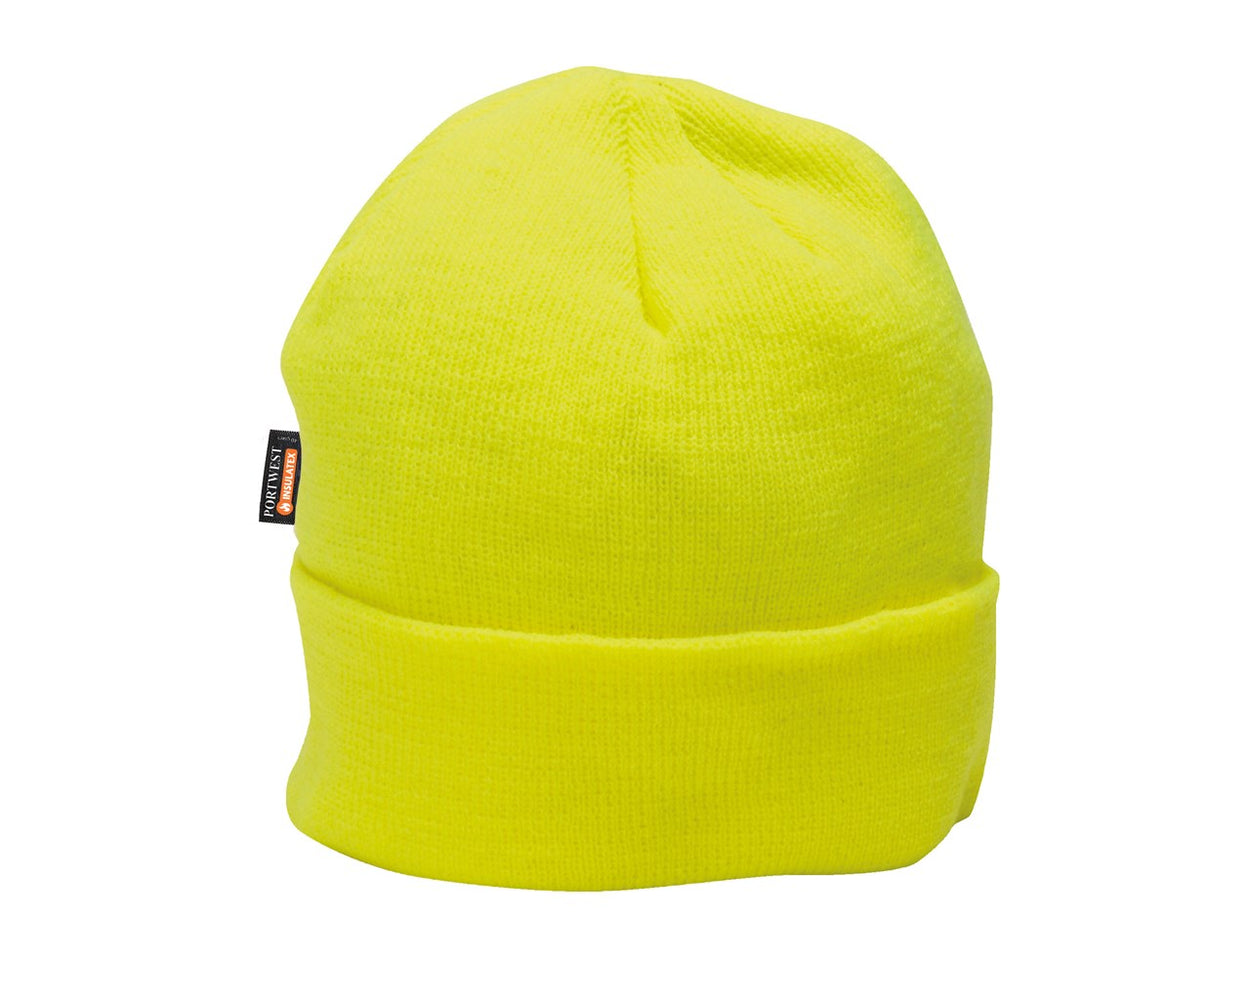 Knit Hat Insulatex Lined Yellow BO13YW (SINGLE OR MULTI-PACK)